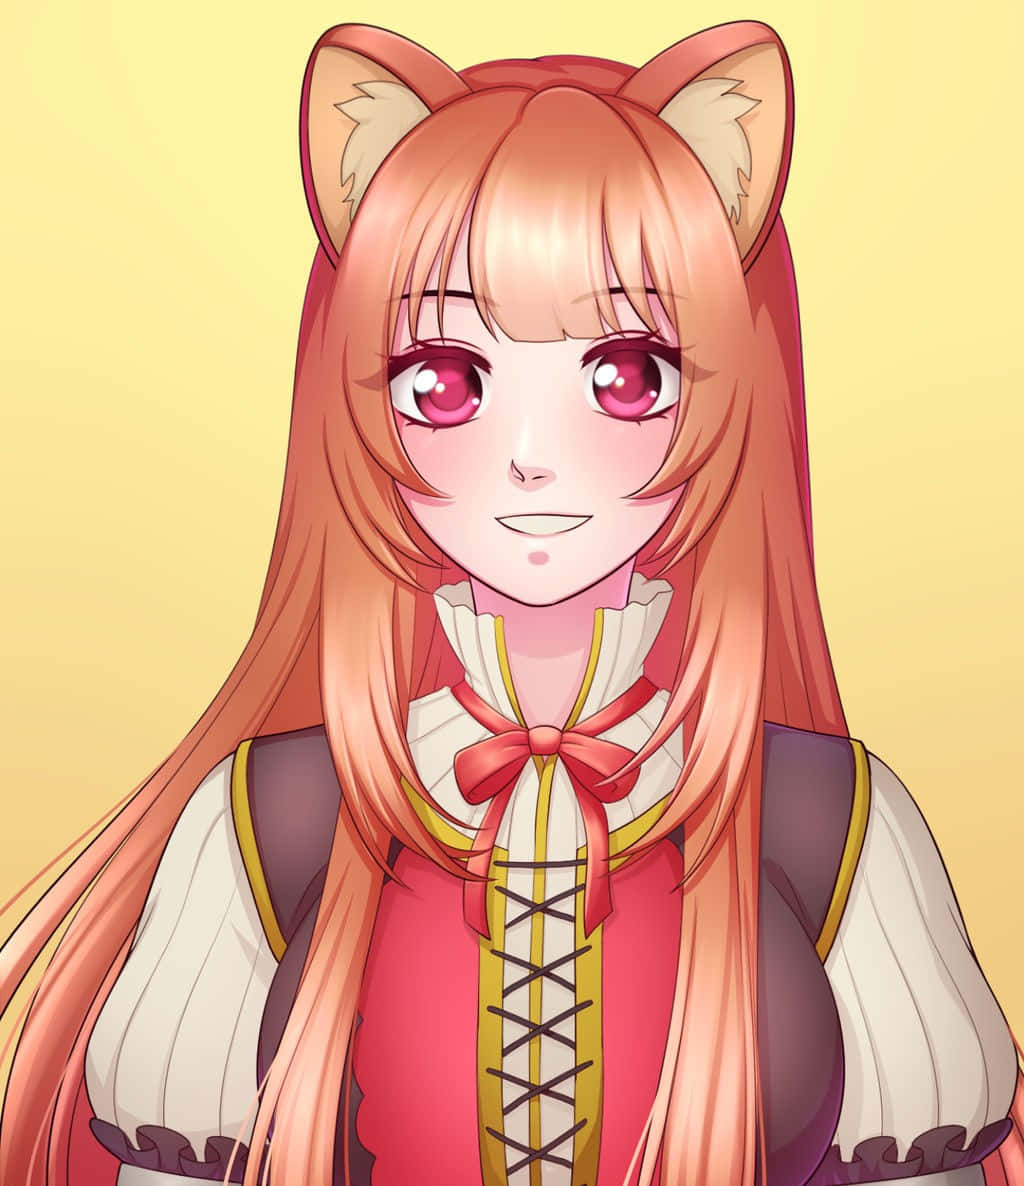 Raphtalia, a strong and resilient child of courage and kindness